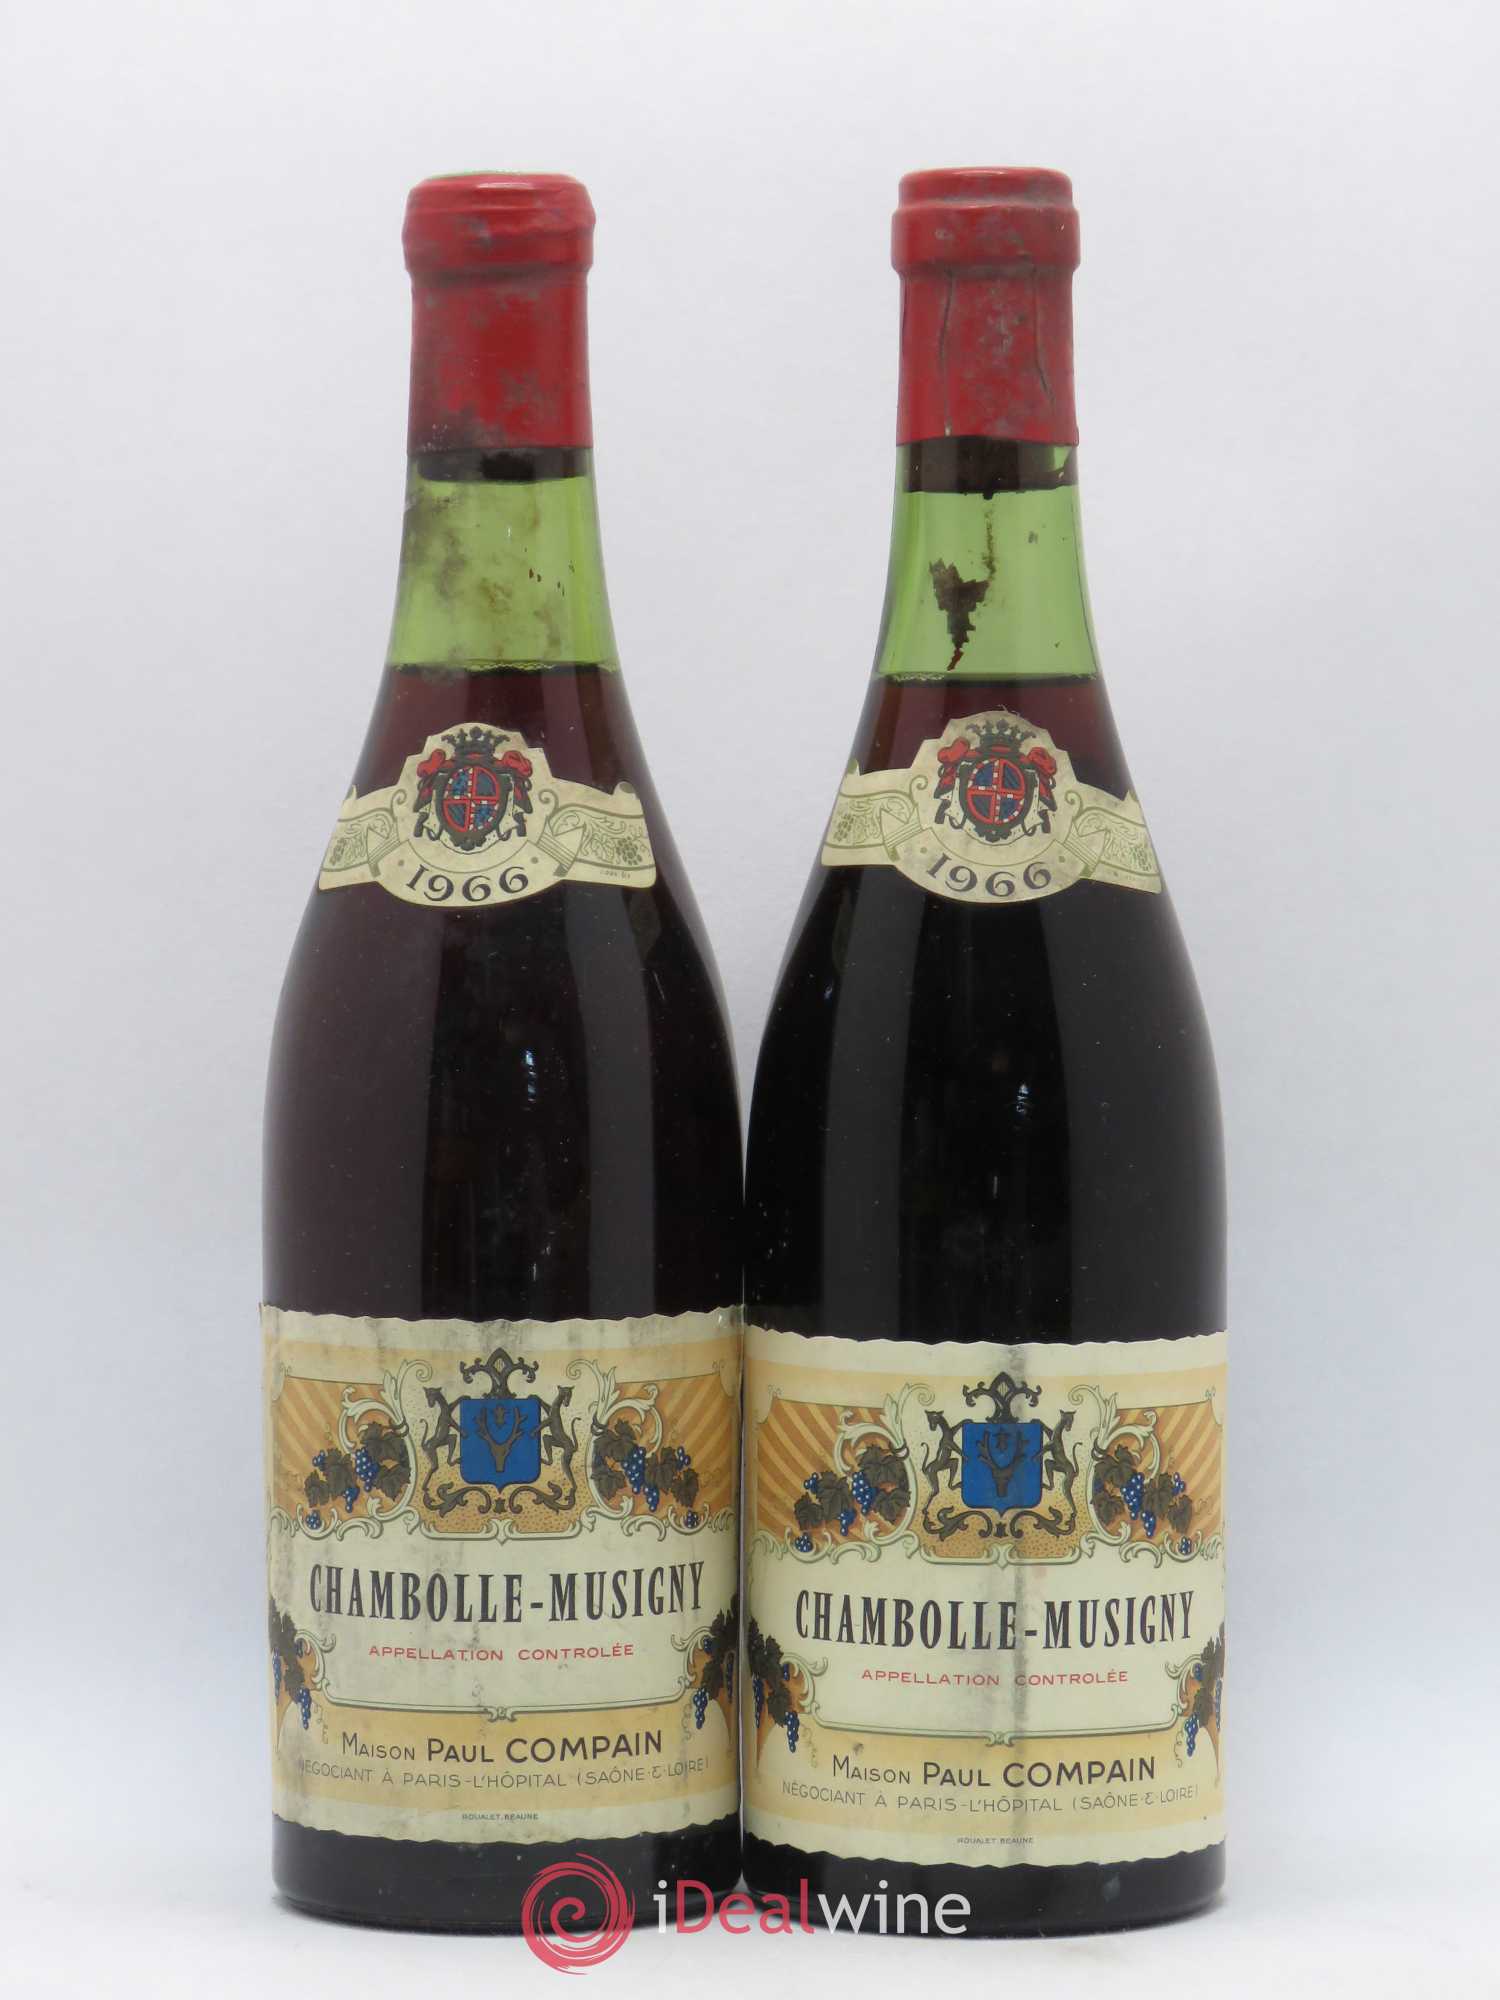 Acheter Chambolle-Musigny Compain 1966 (lot: 4187)